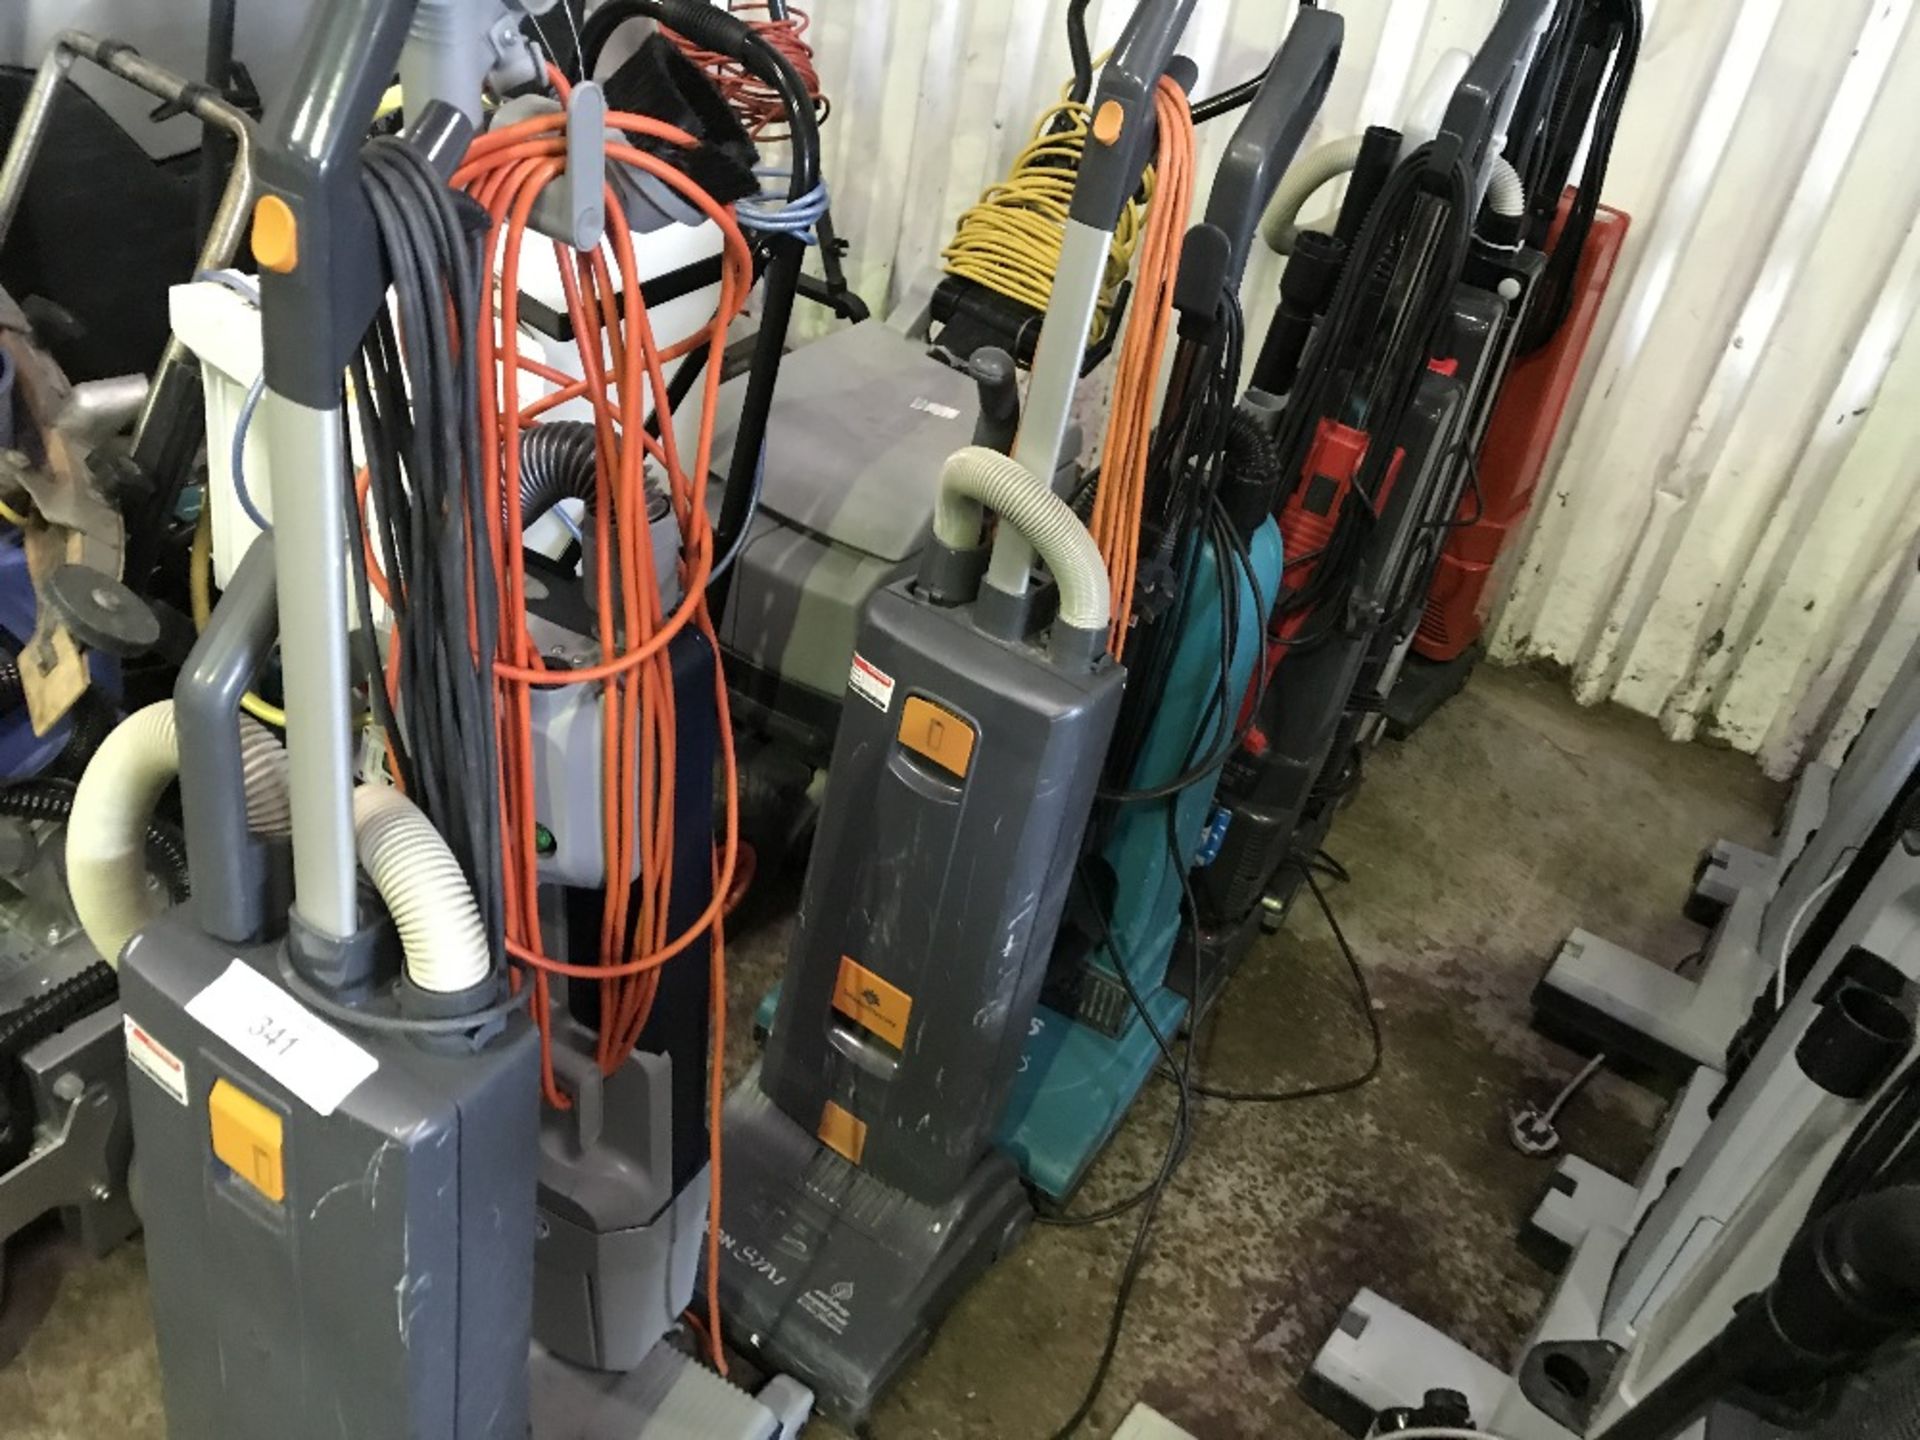 8 X ASSORTED VACUUM CLEANERS...SOURCED FROM LARGE CONTRACT CLEANING COMPANY.....THIS ITEM MAY BE